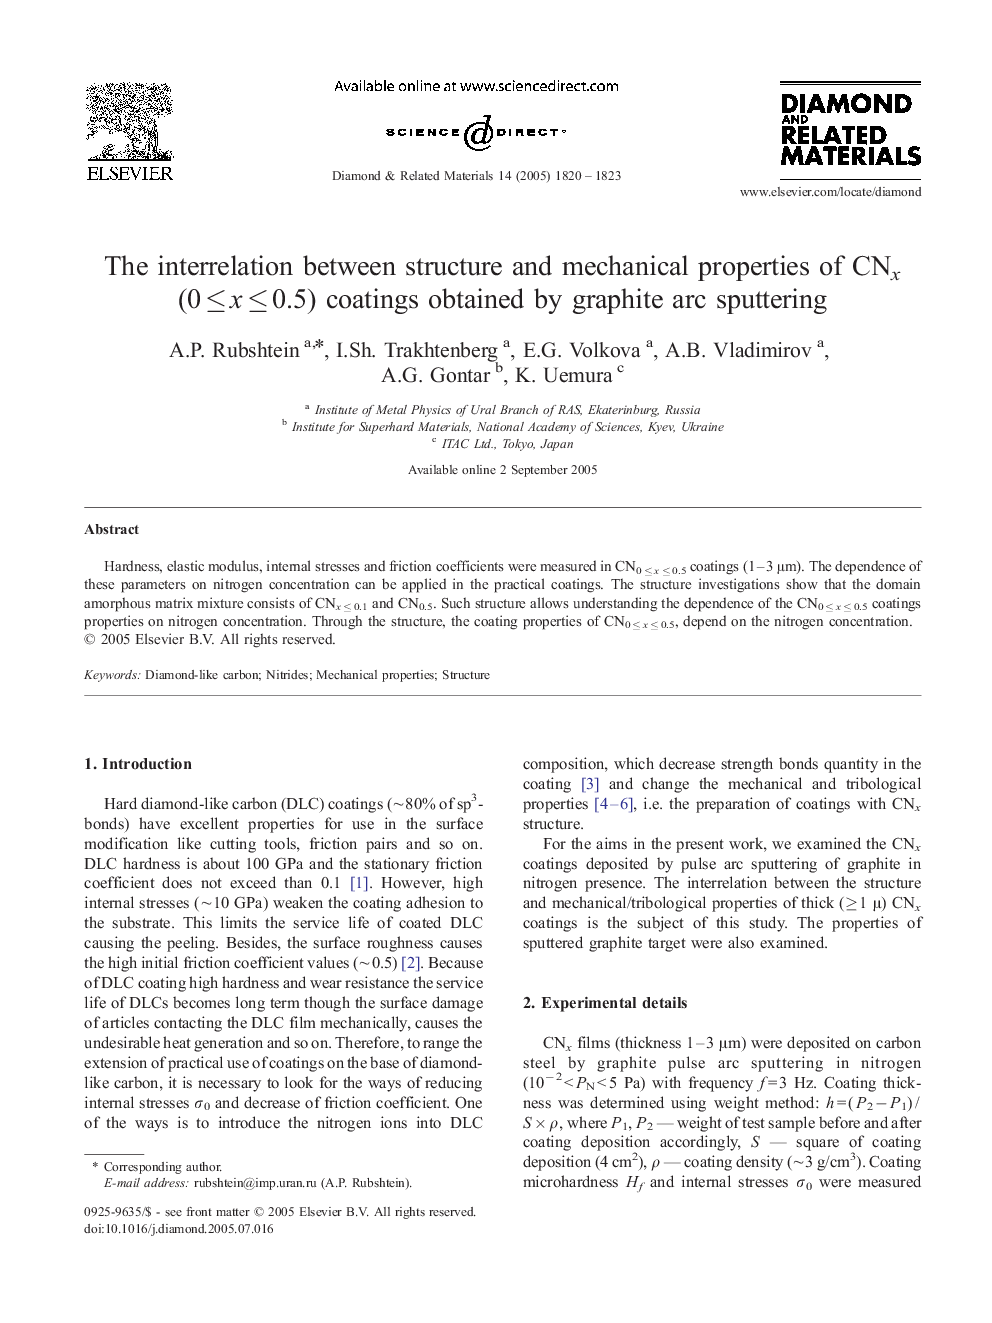 The interrelation between structure and mechanical properties of CNx (0 ≤ x ≤ 0.5) coatings obtained by graphite arc sputtering